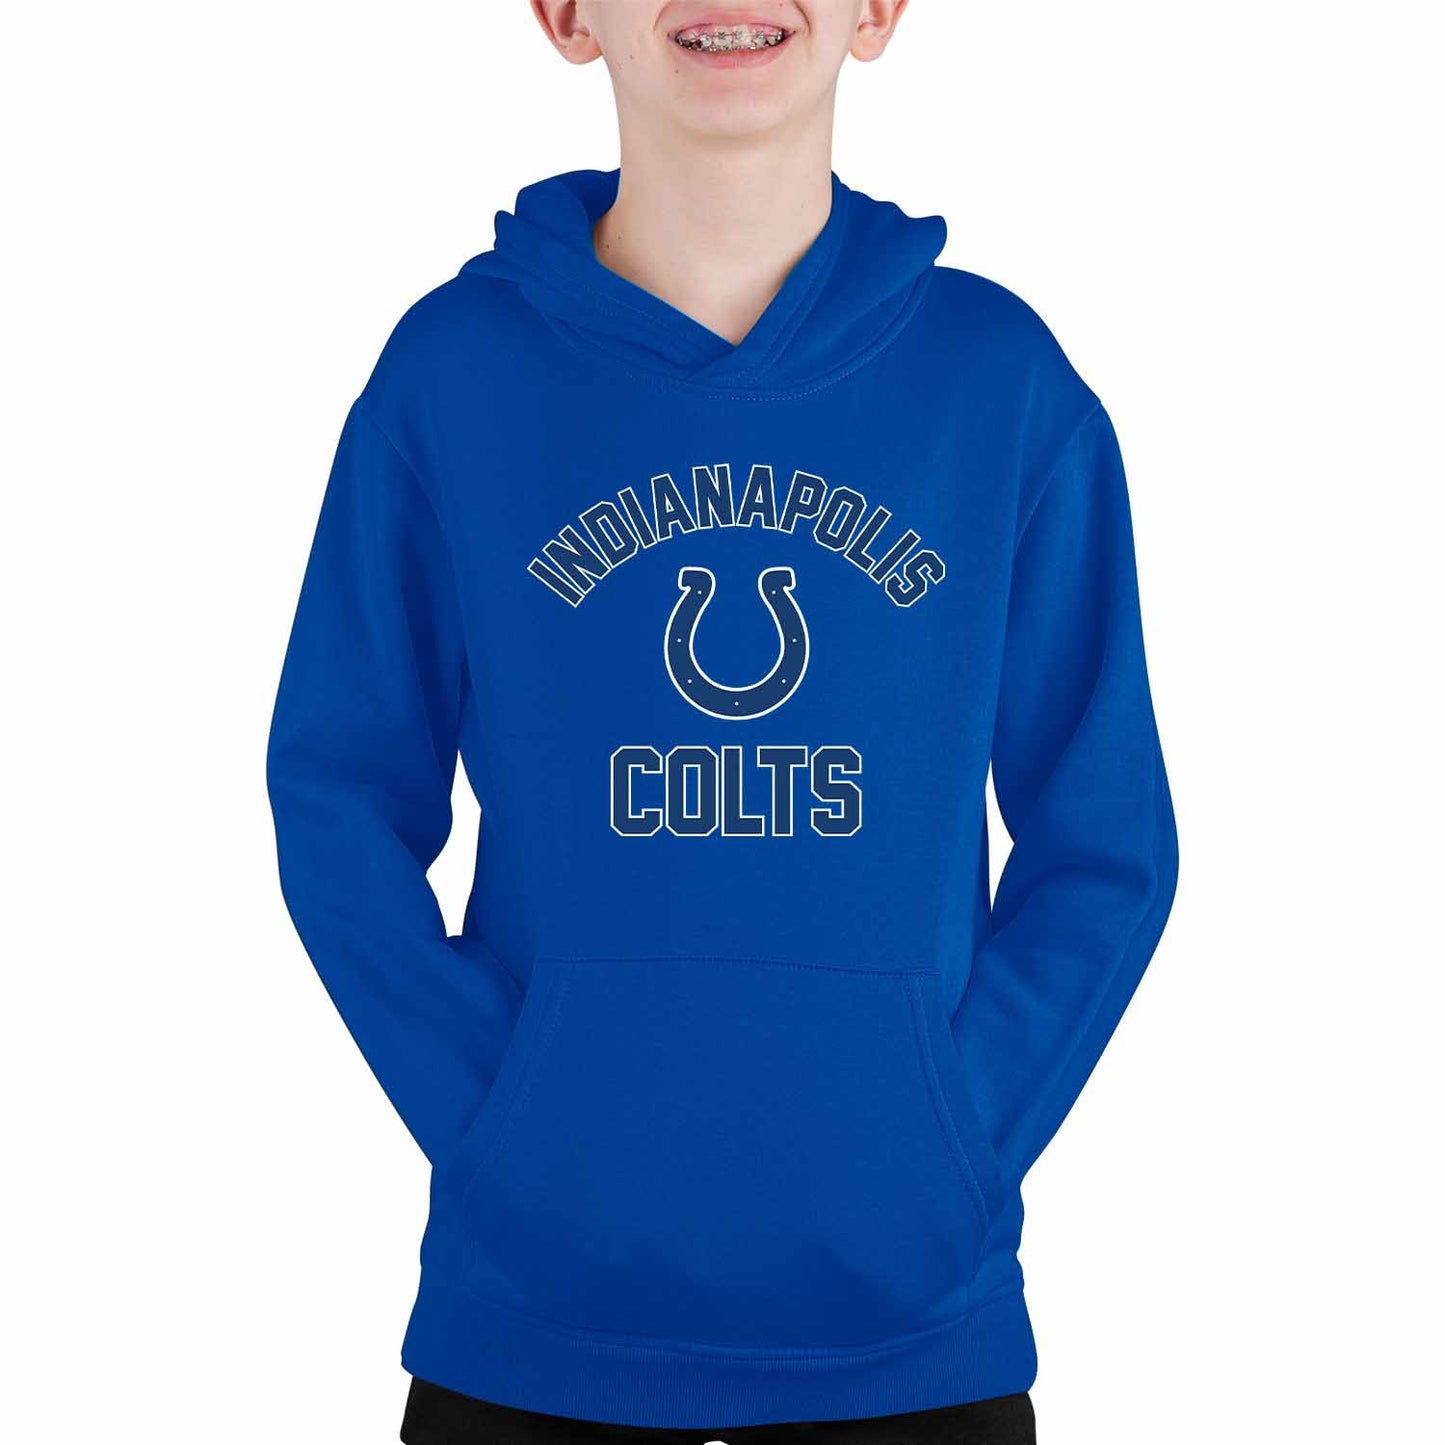 Indianapolis Colts NFL Youth Gameday Hooded Sweatshirt - Royal